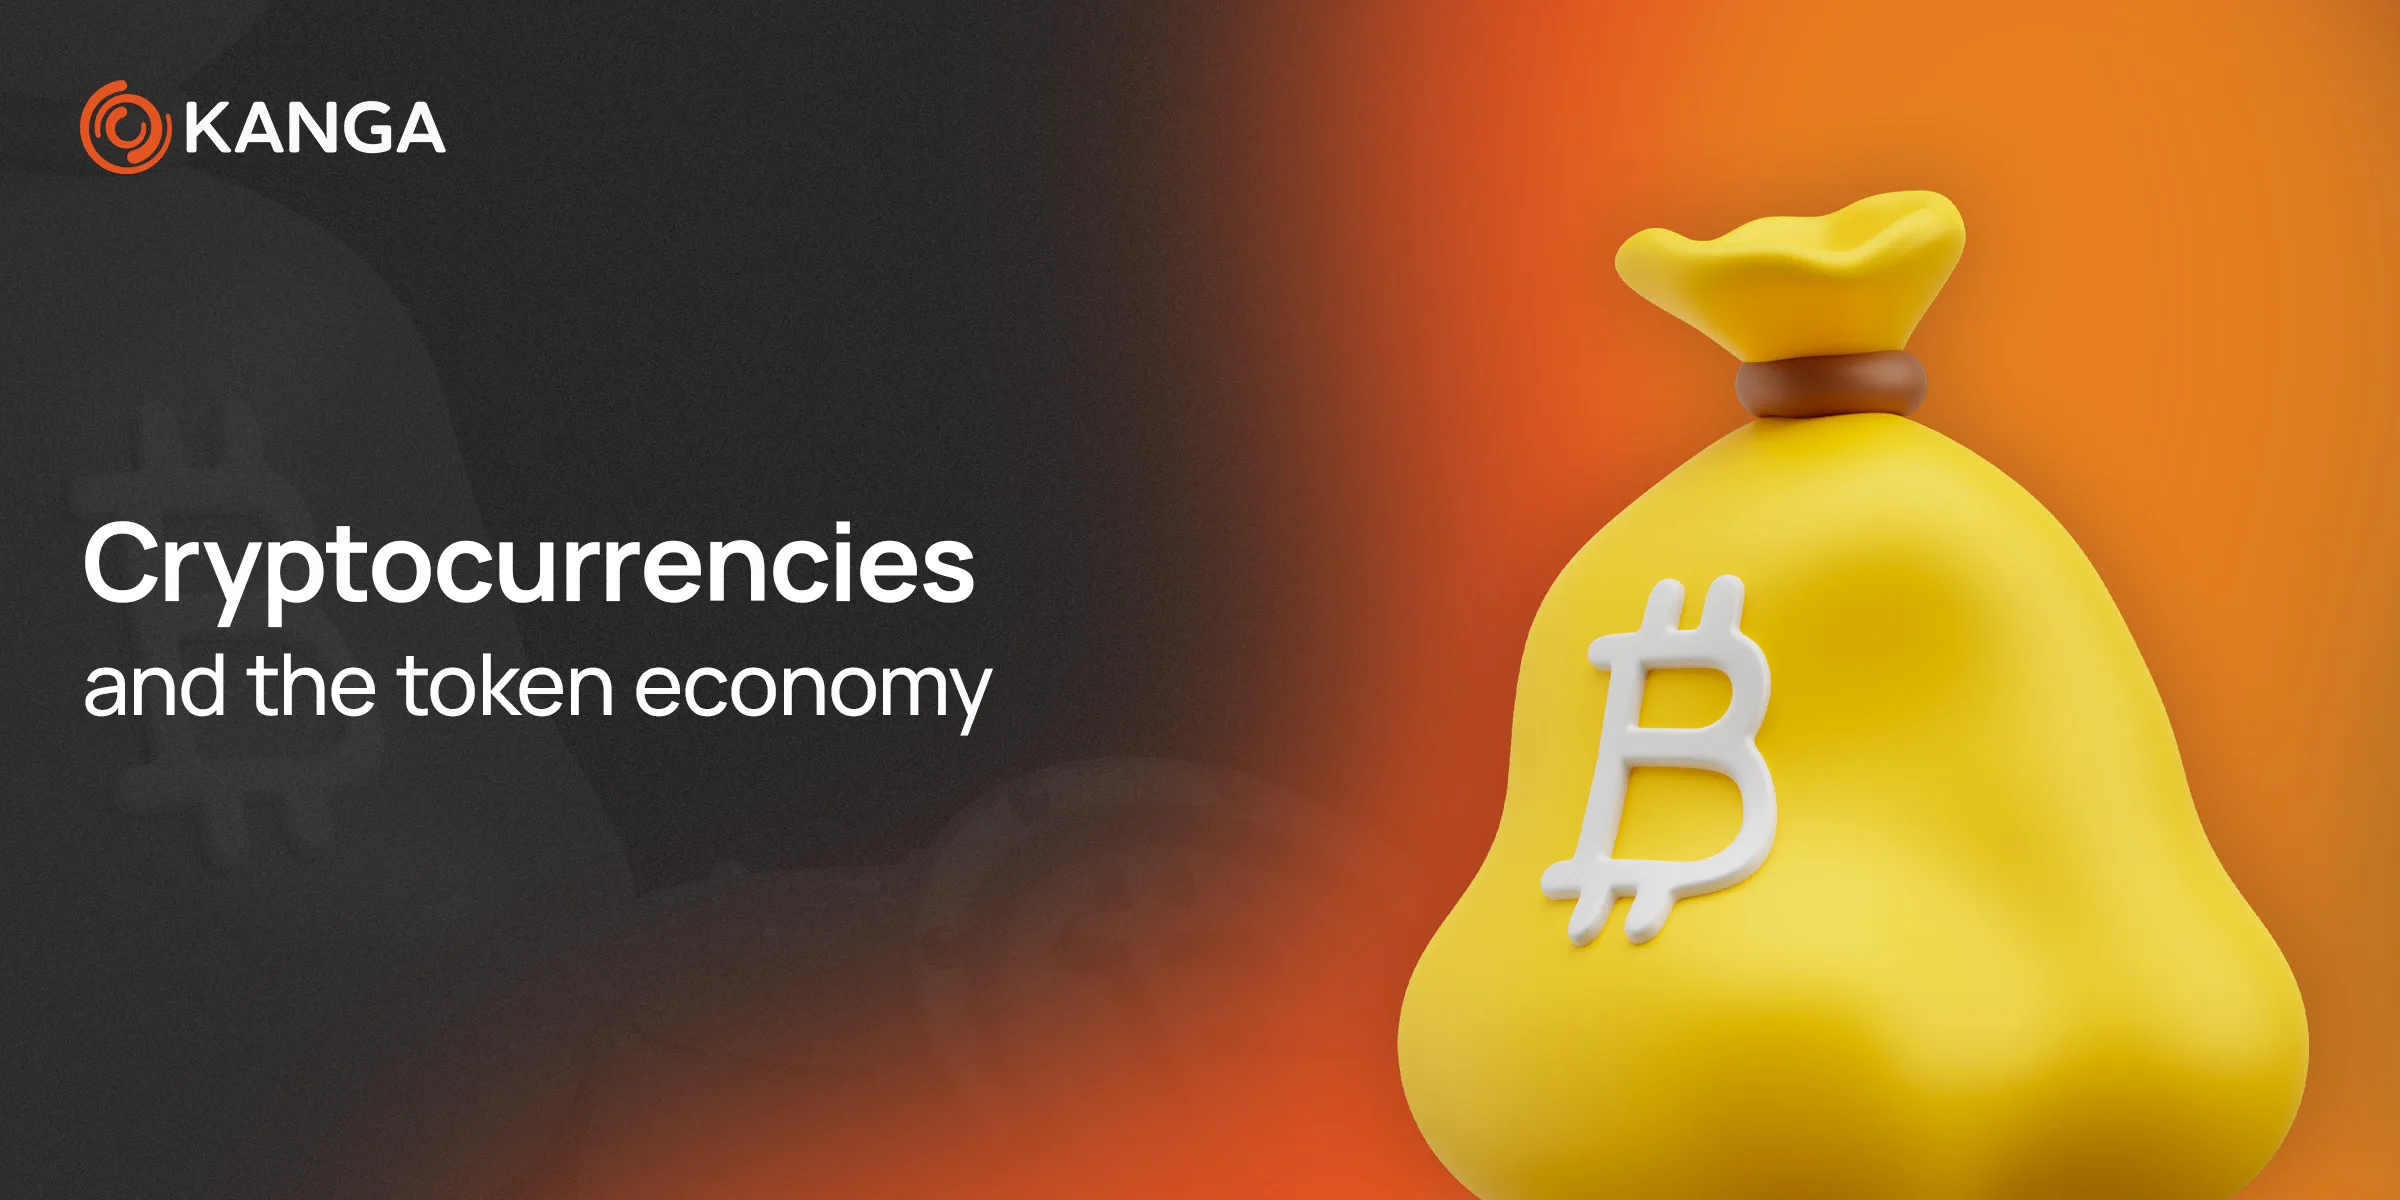 Cryptocurrencies and the token economy